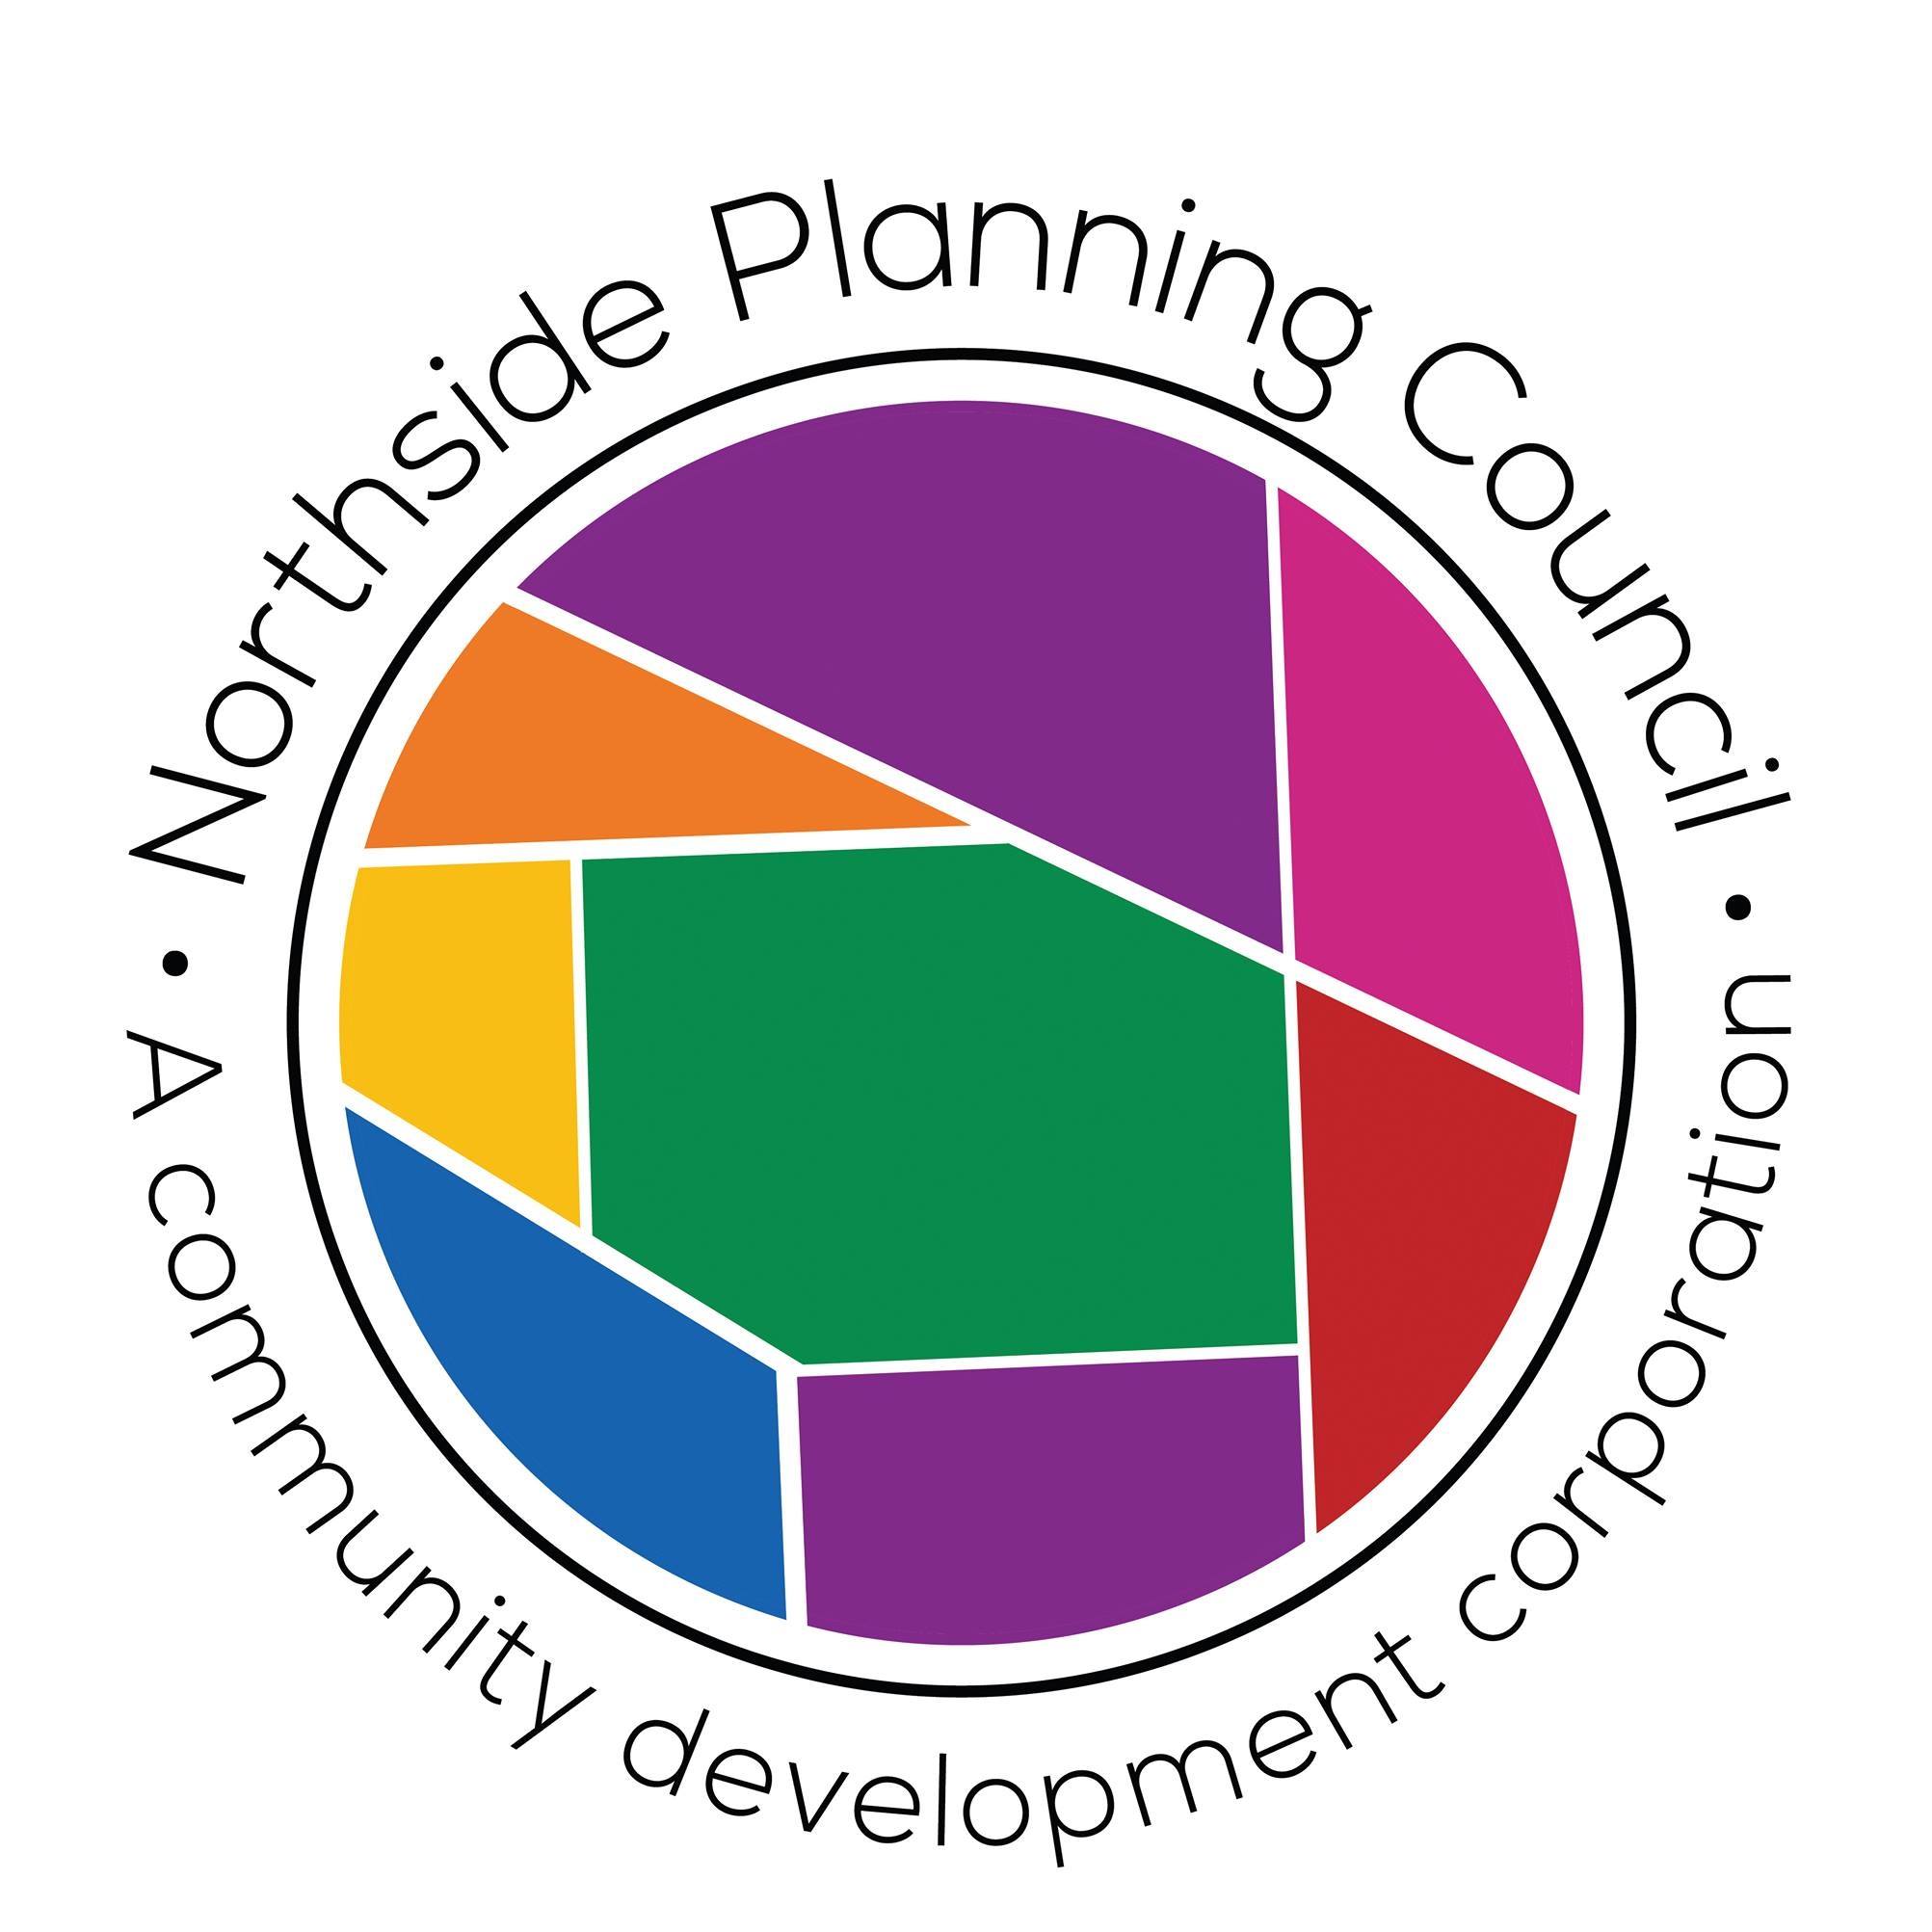 Northside Planning Council Will Celebrate 25 Years of Community Transformation